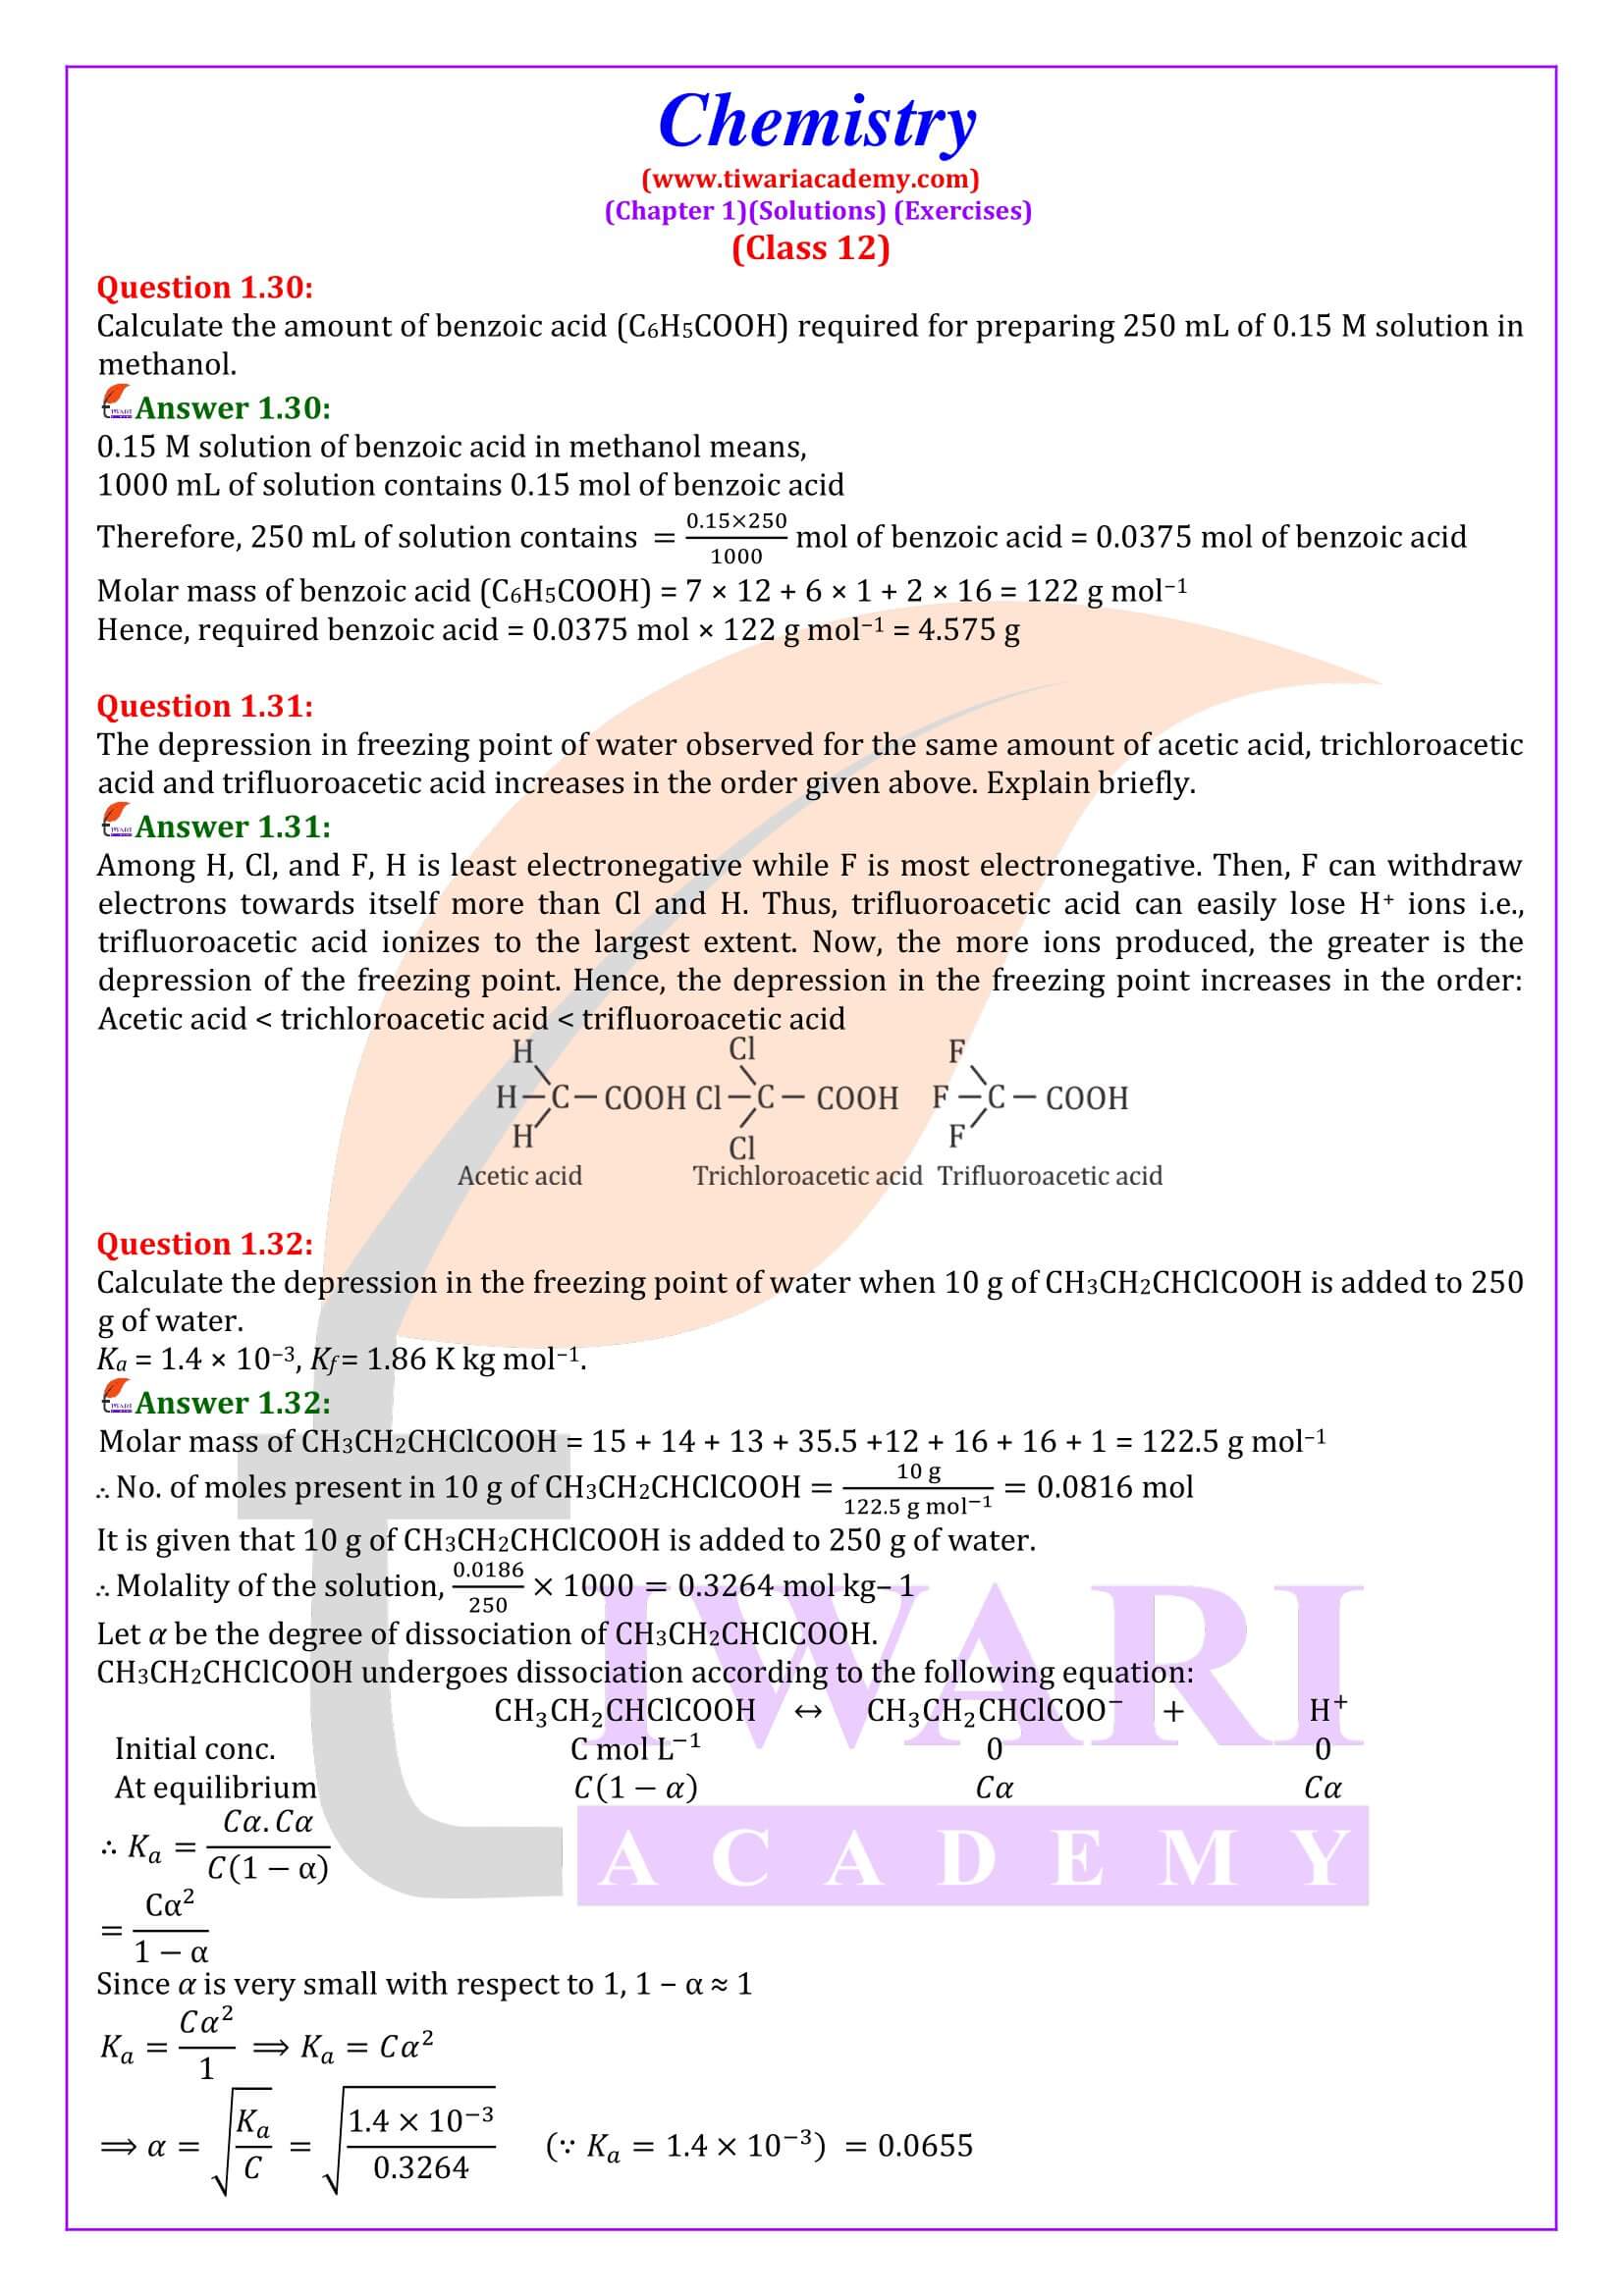 NCERT Solutions for Class 12 Chemistry Chapter 1 Exercise answers